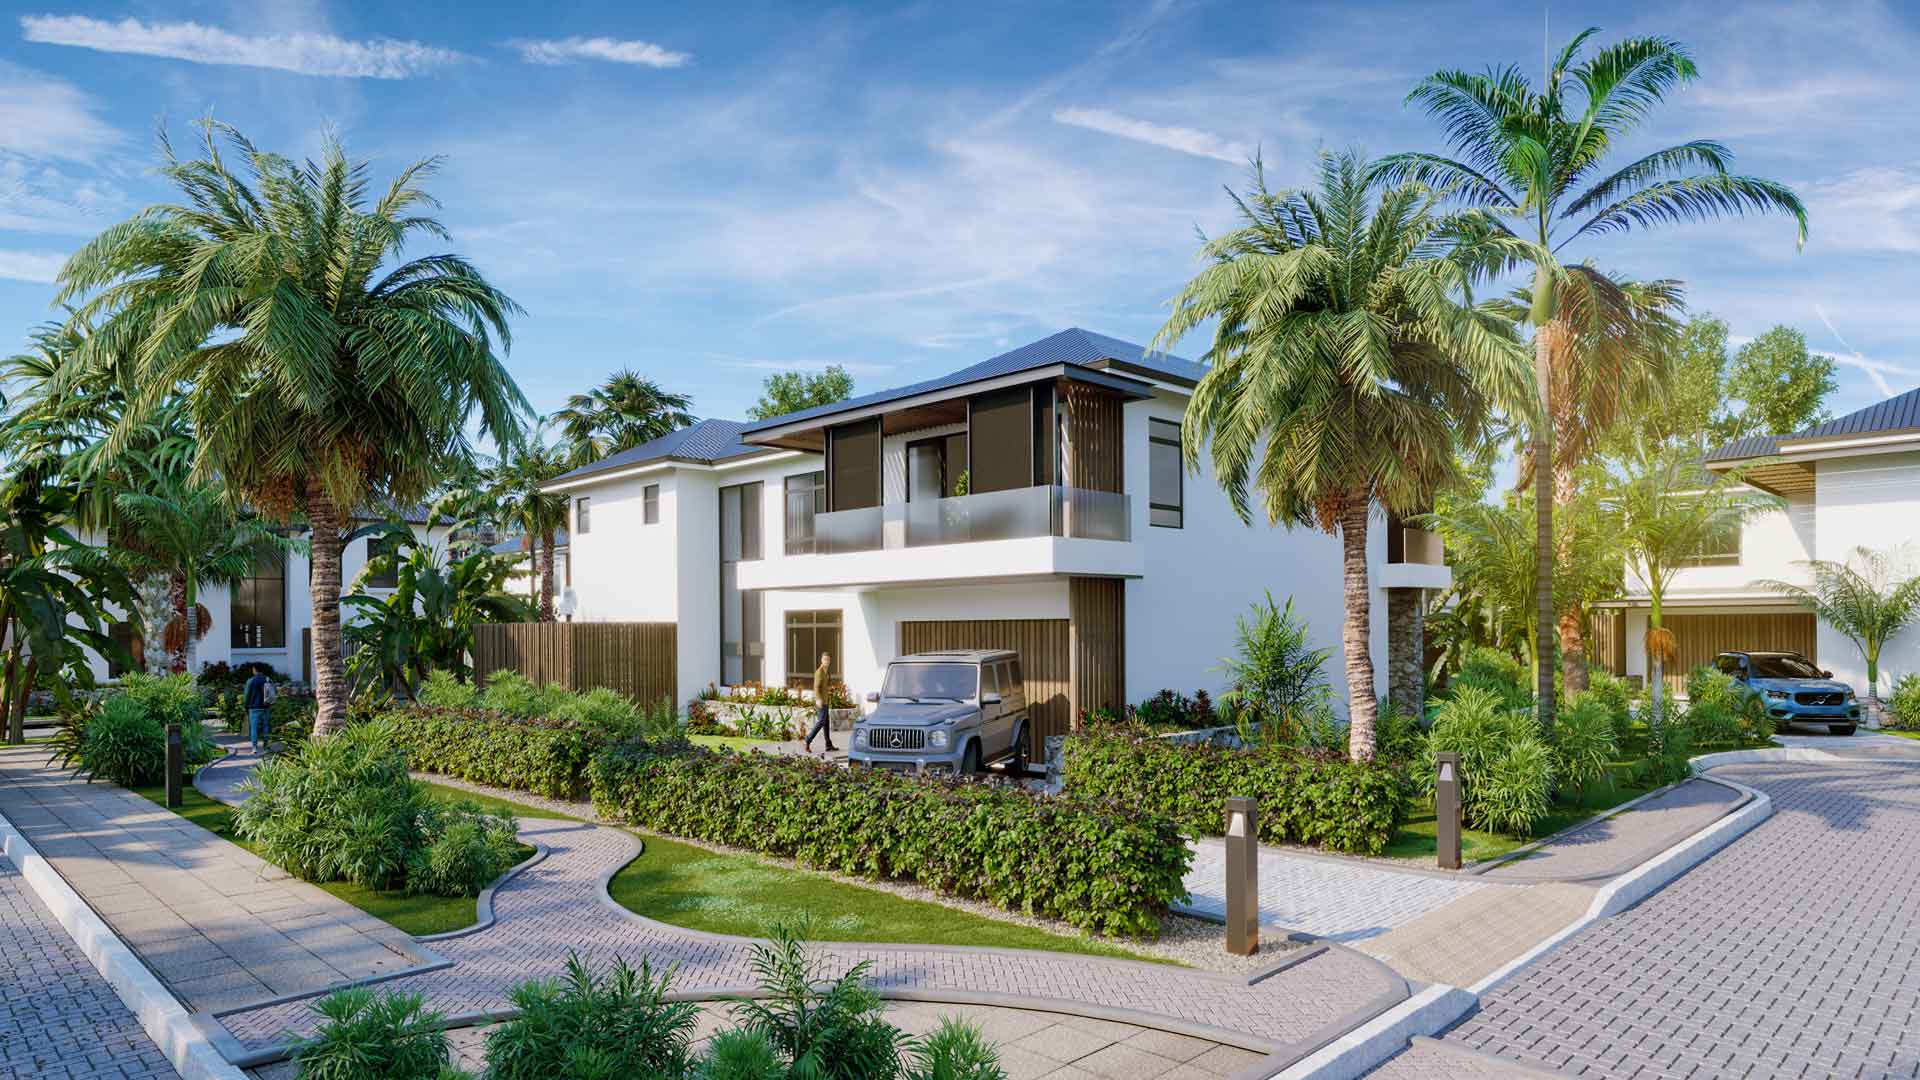 Exterior view of the luxury villa in the PDS AMARI BAY development in Tamarin, Mauritius by Westimmo Luxury Real Estate Mauritius